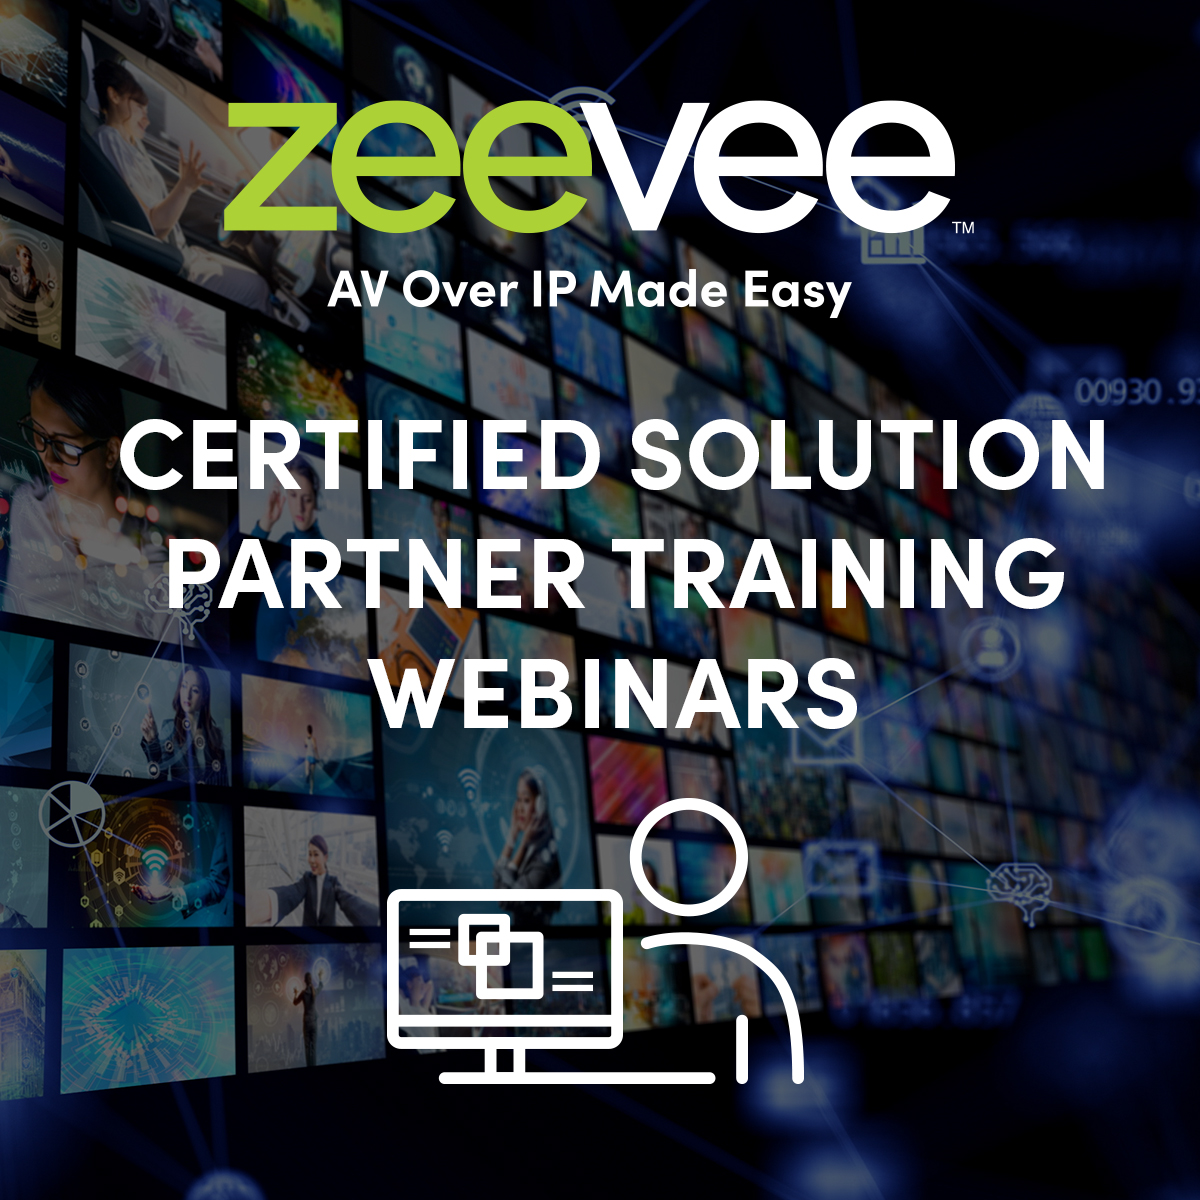 events-header-featured-image-certified-partner-training-